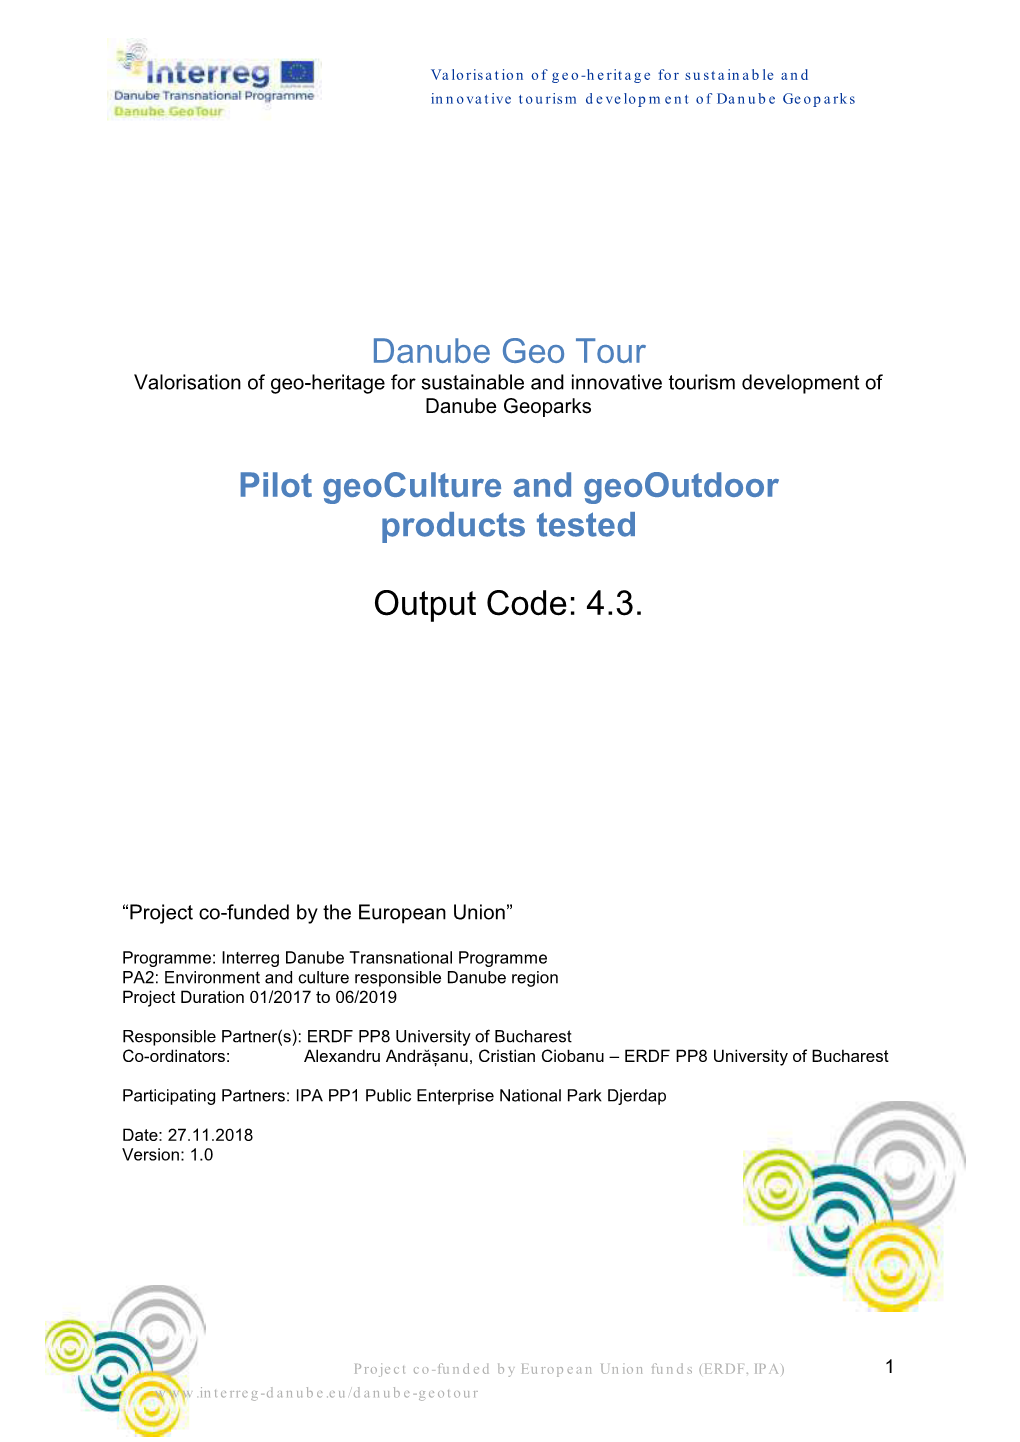 Danube Geo Tour Pilot Geoculture and Geooutdoor Products Tested